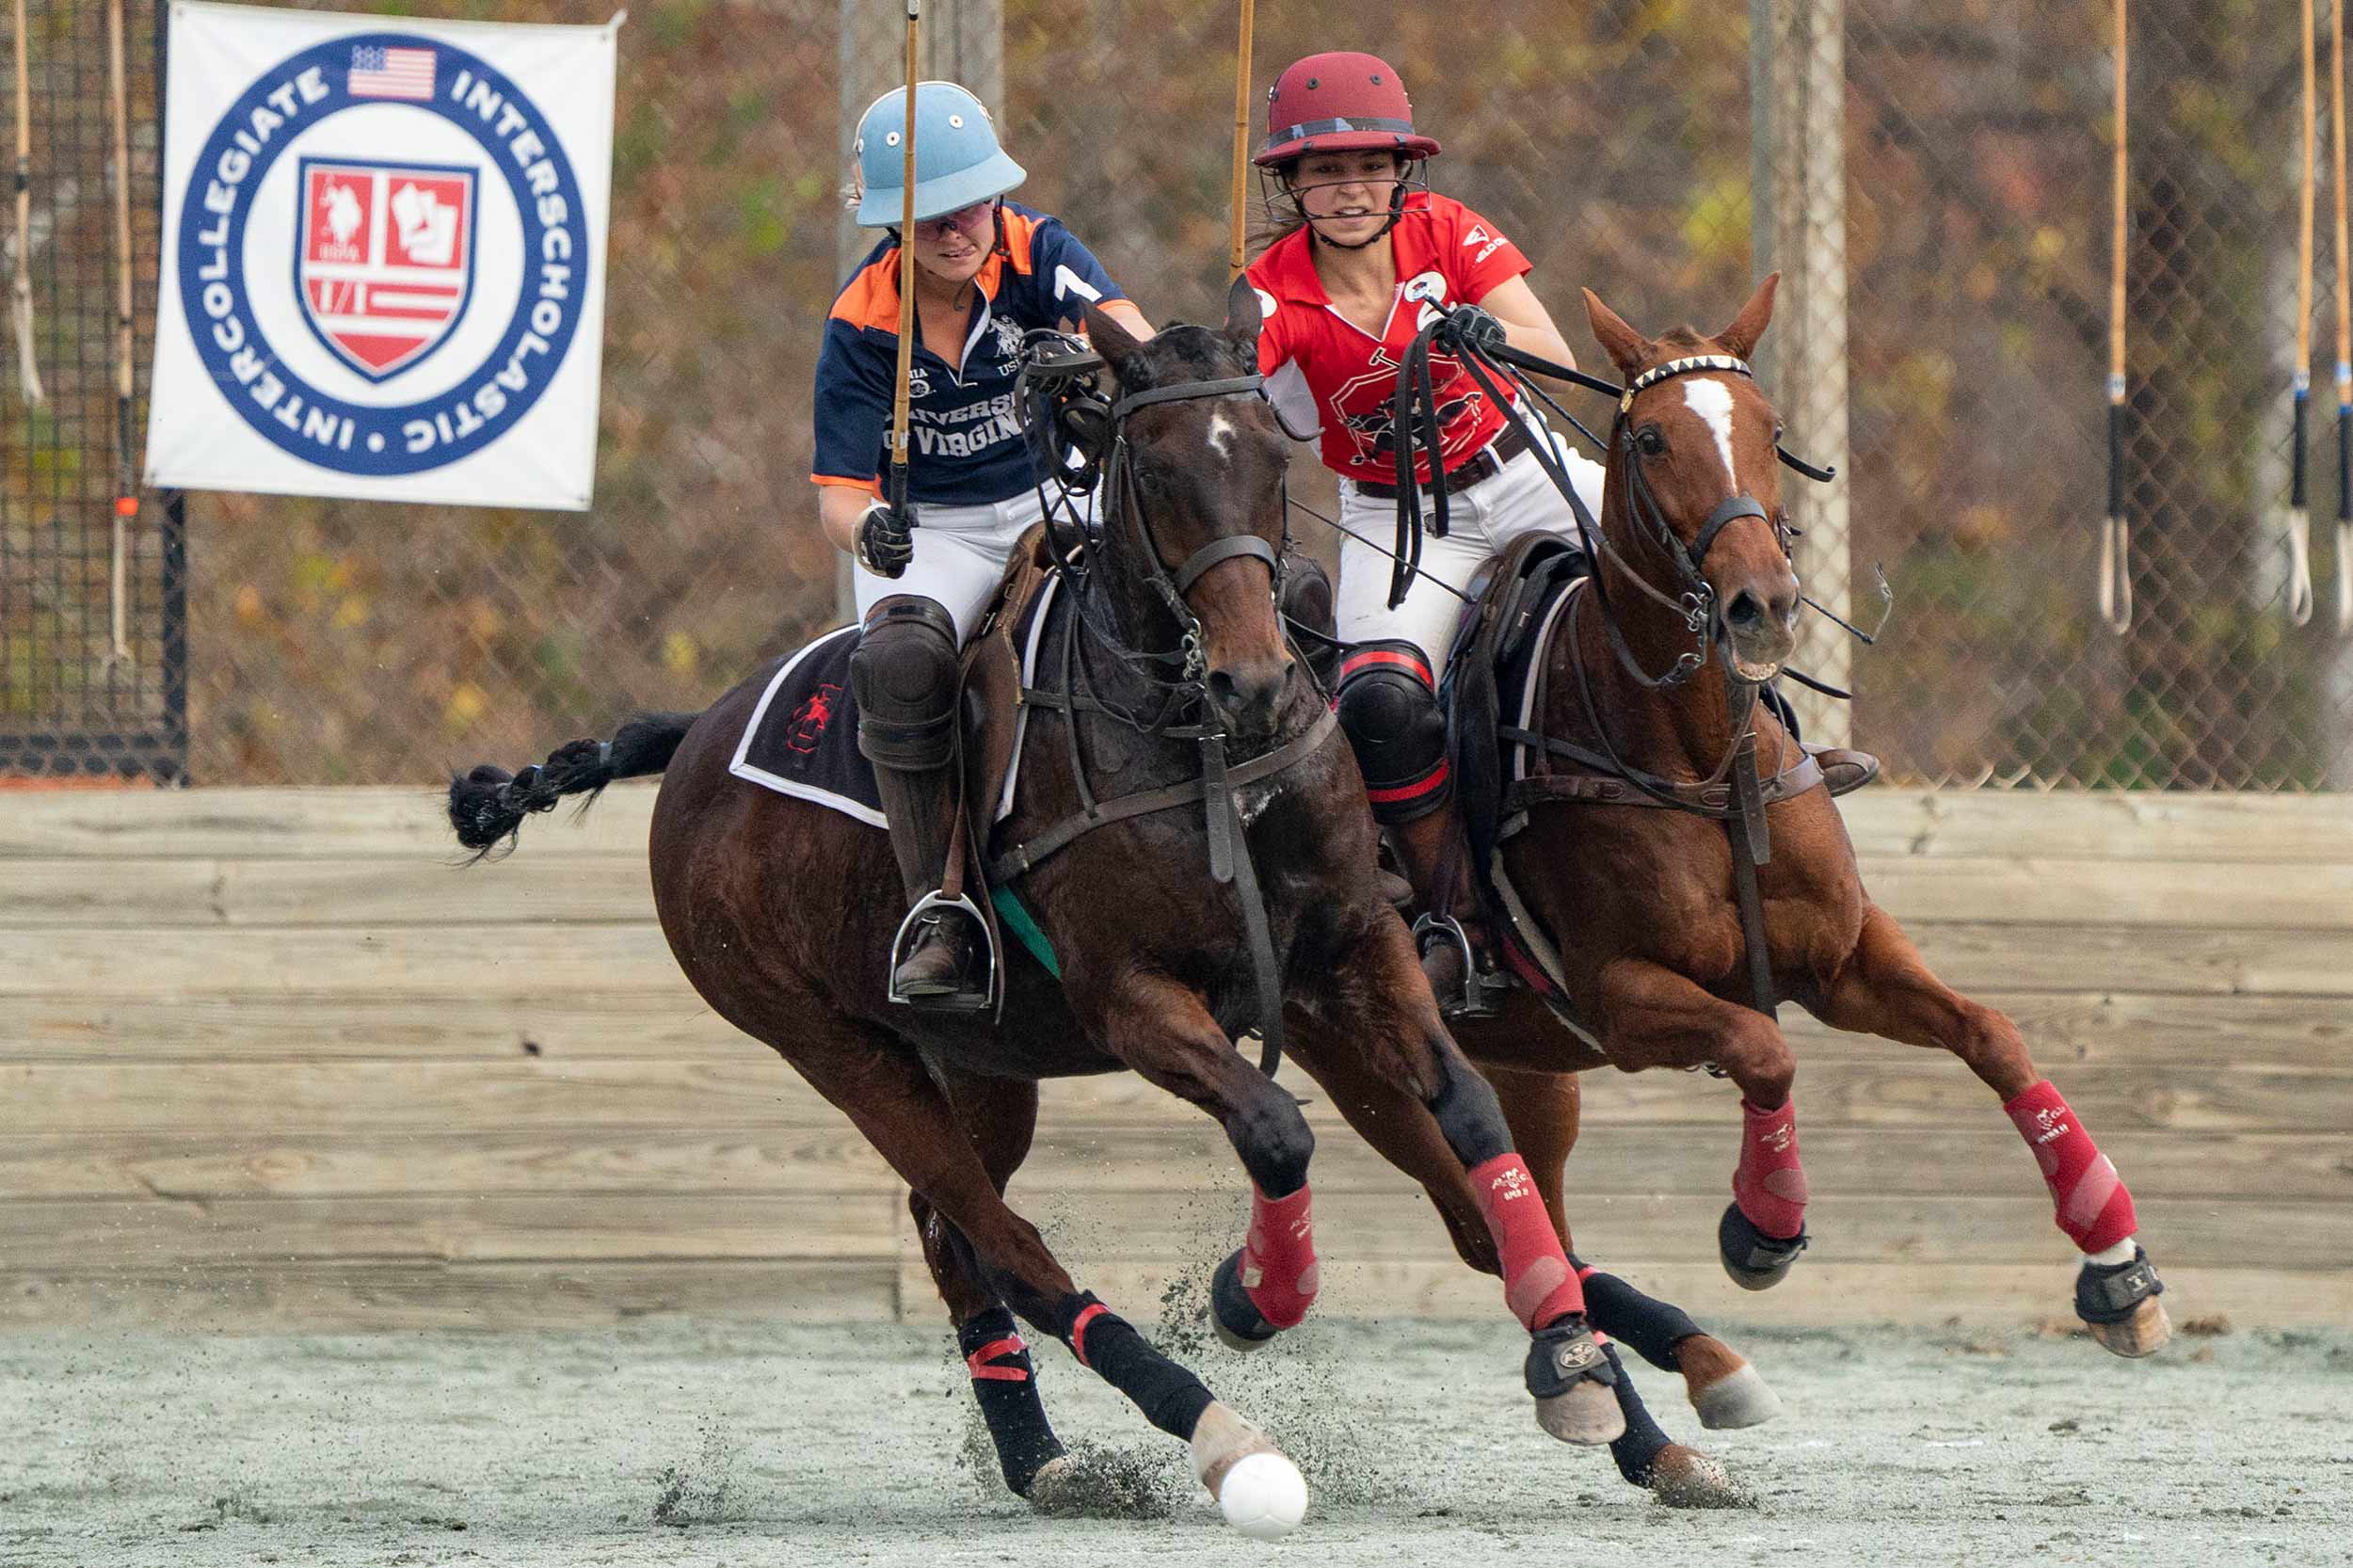 Two Polo opponents going after a ball on horses